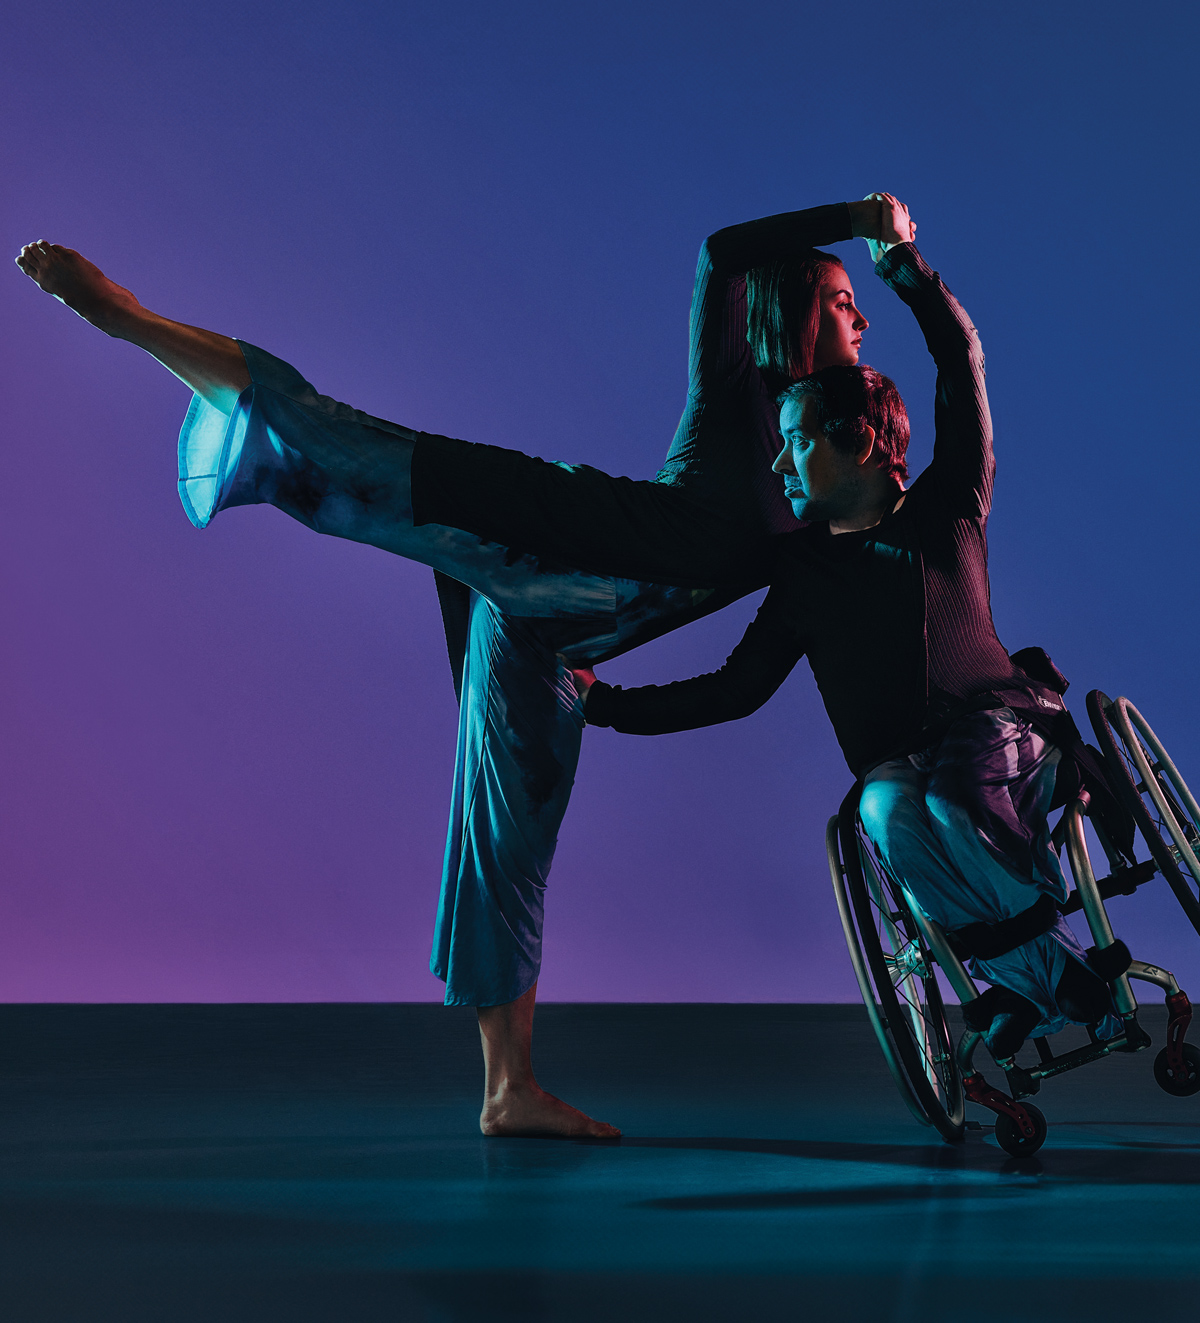 Redefining movement at Full Radius Dance, Georgia’s only pro dance company for people with and without disabilities